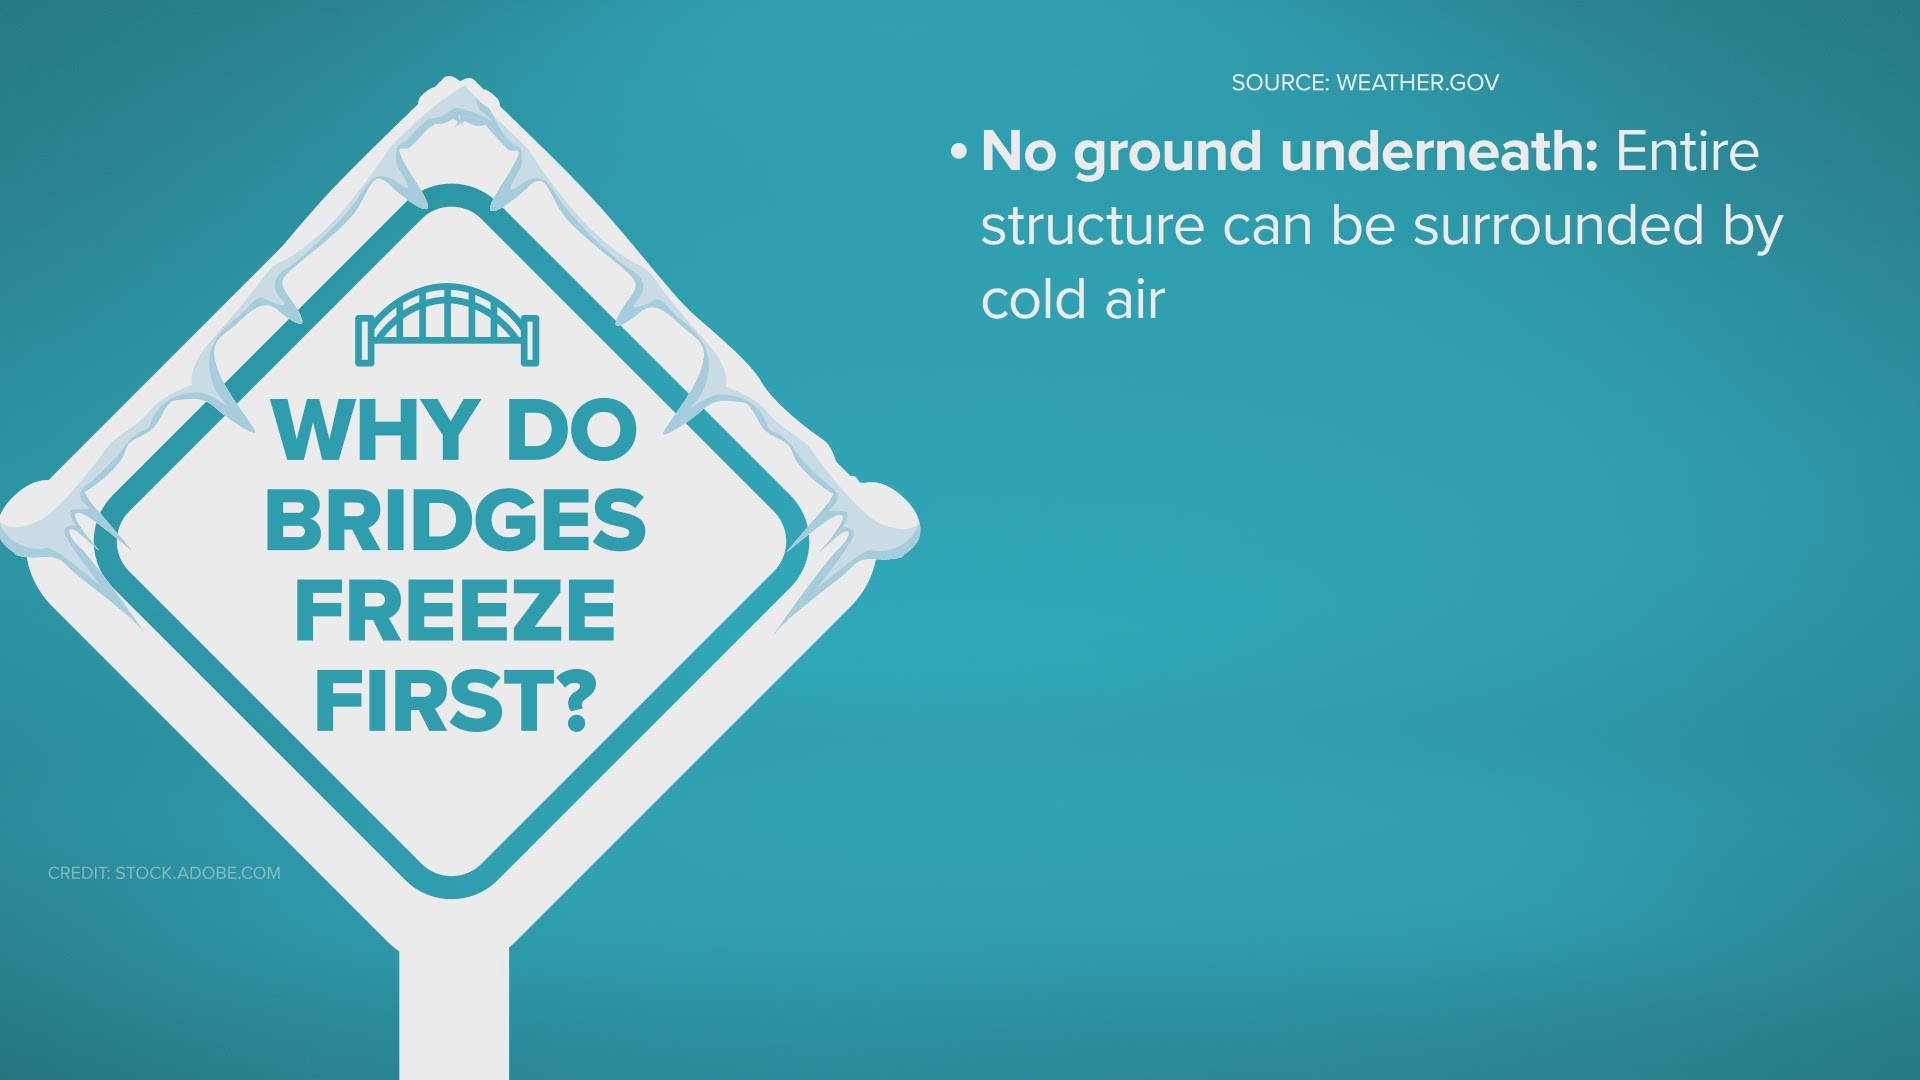 Here's why bridges freeze first in cold weather.